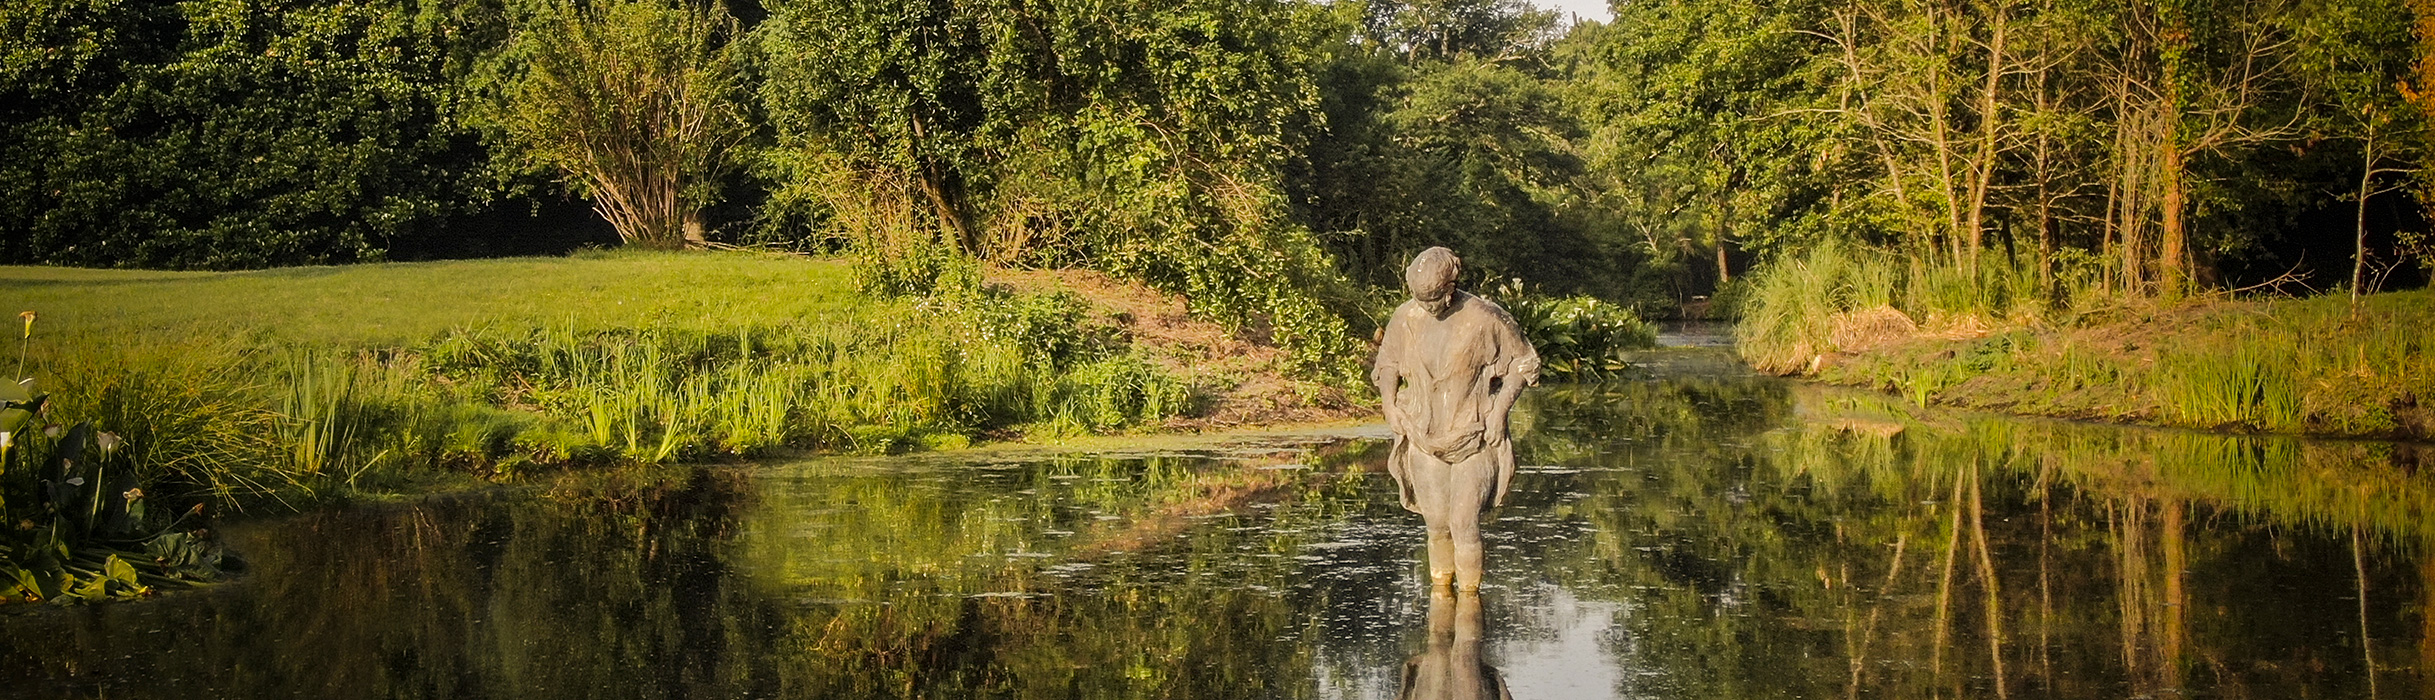 The Bather, bronze statue in the heart of Giscours park